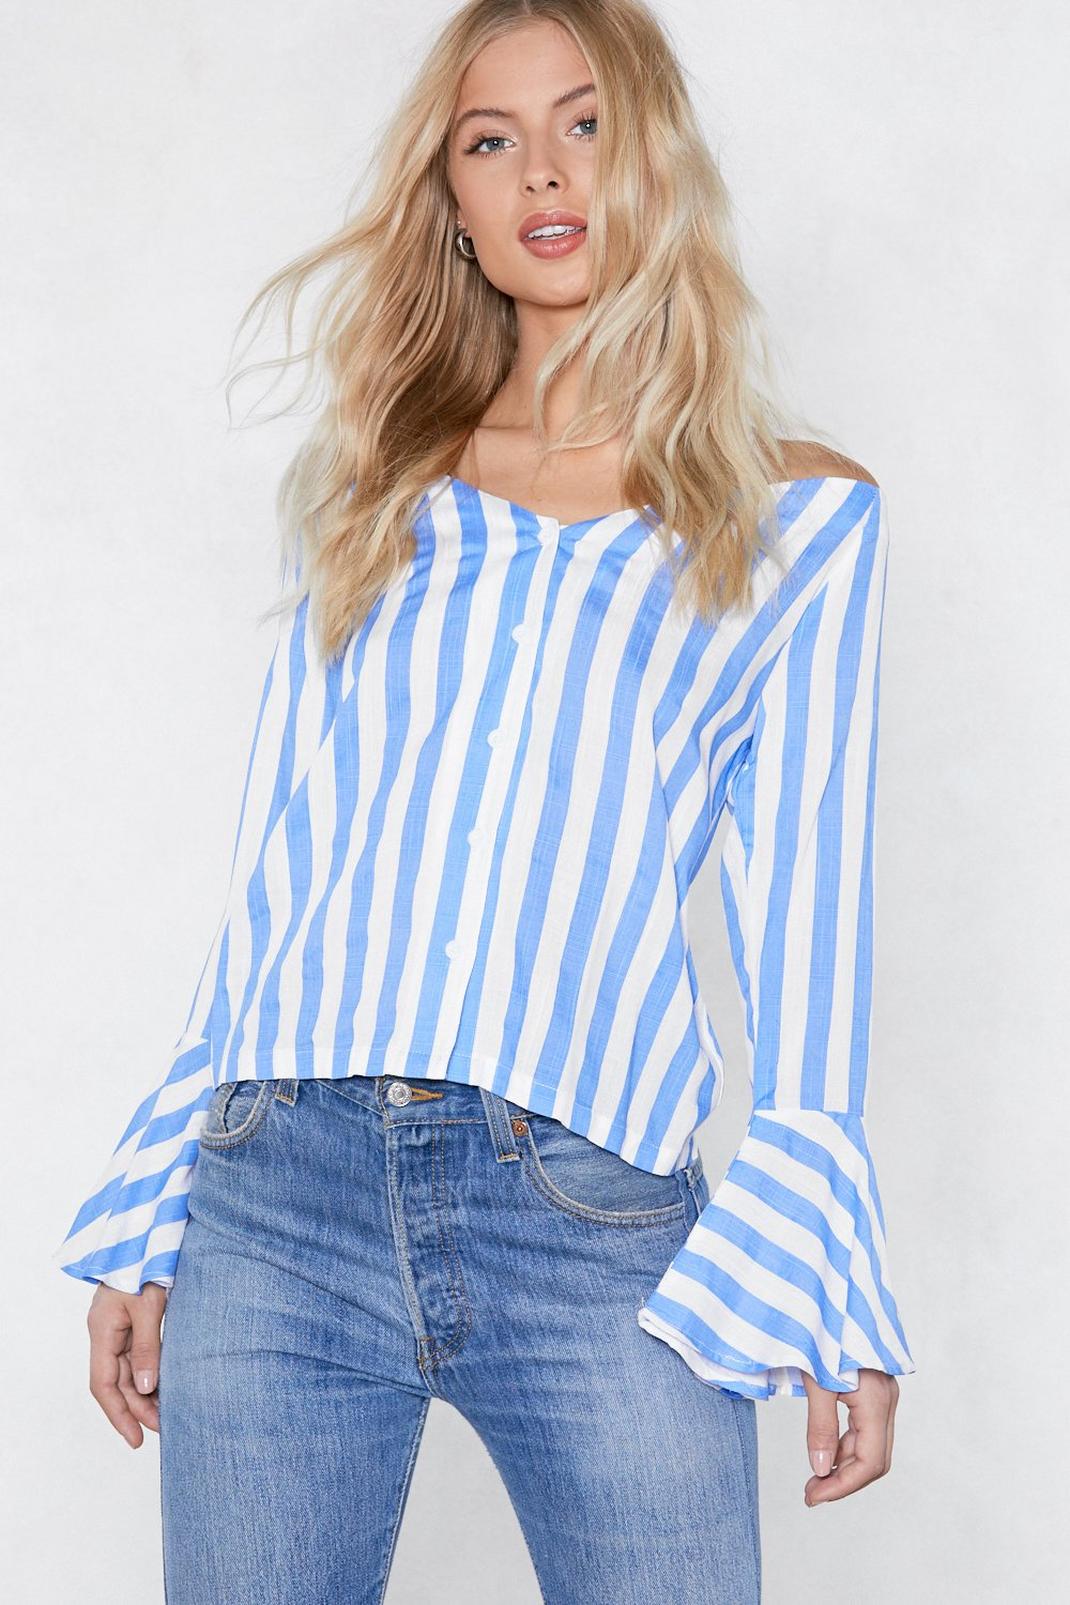 Along Those Lines Striped Shirt image number 1